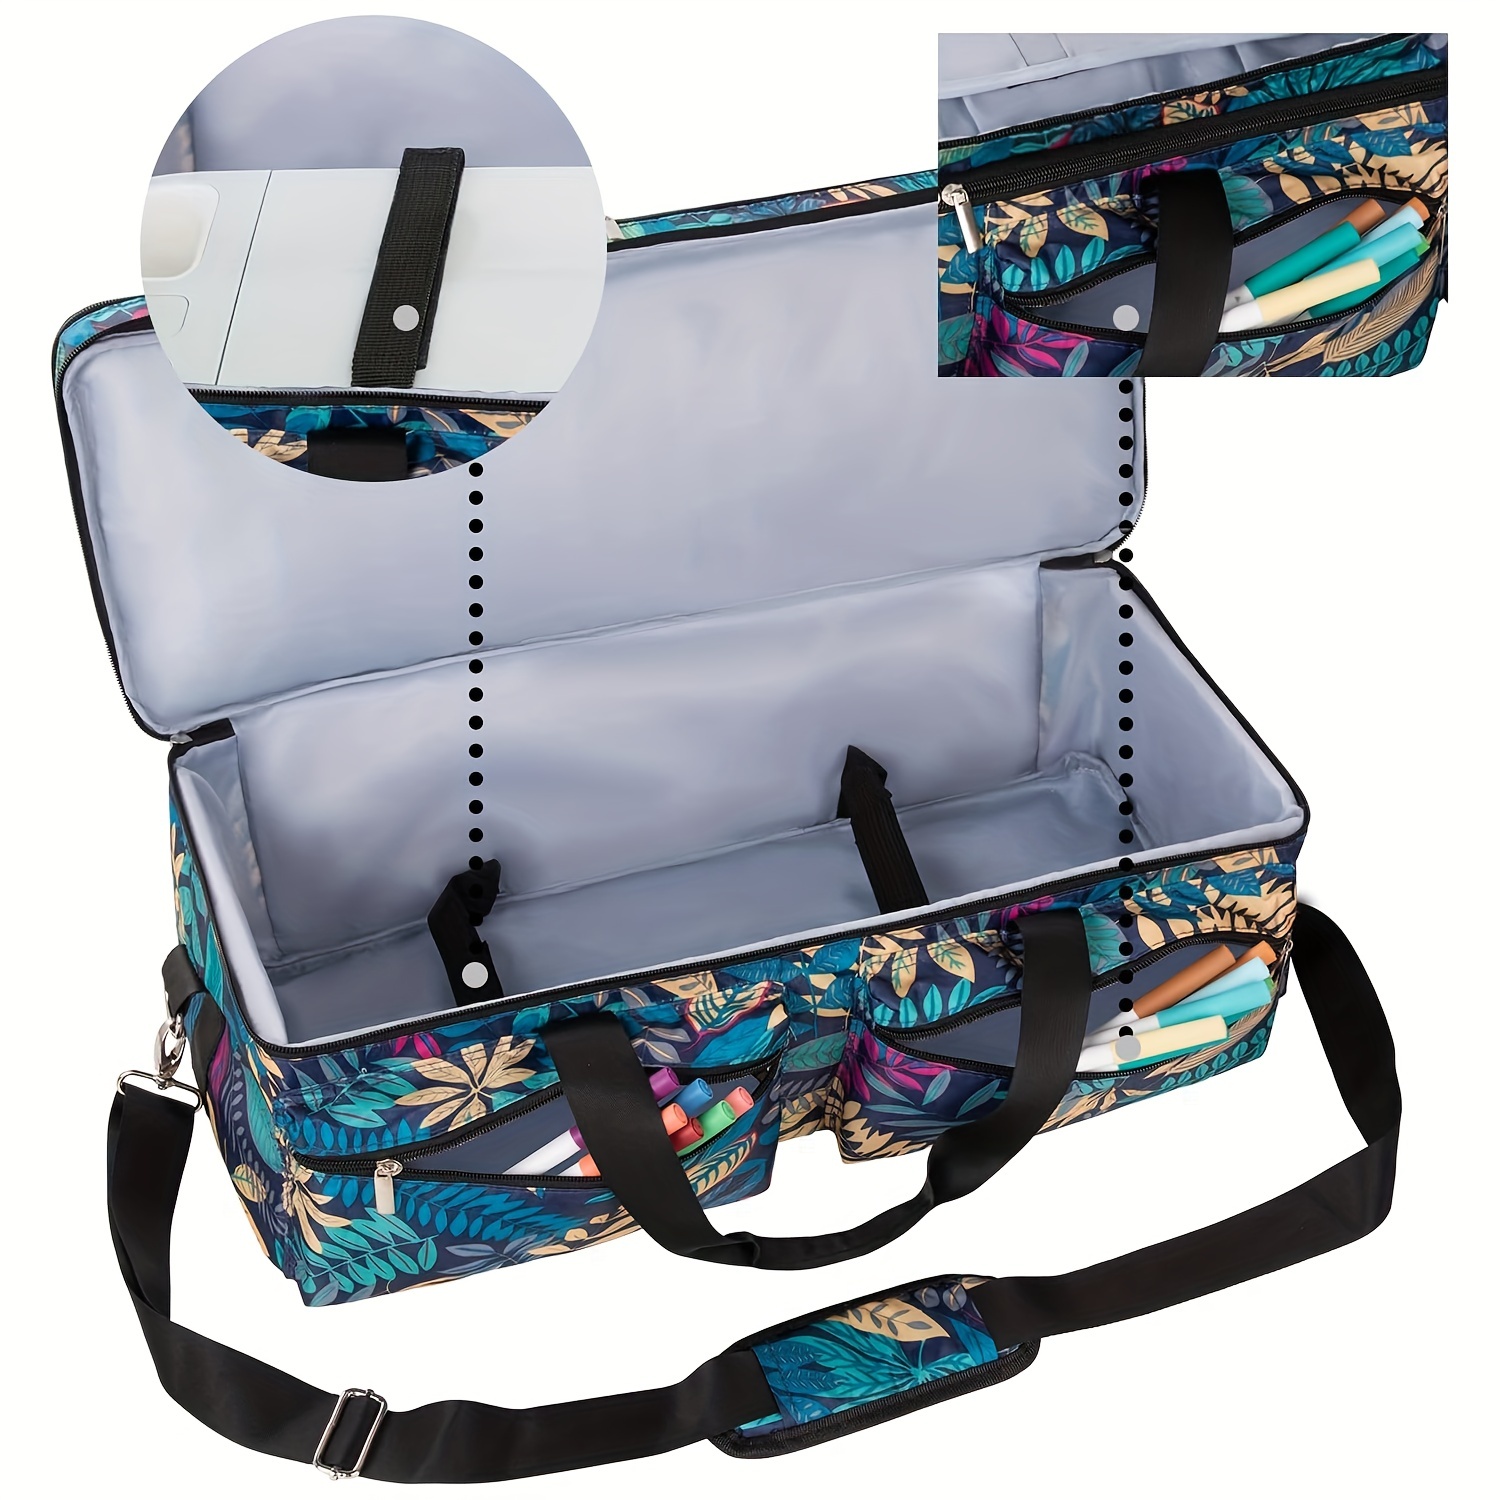 Carrying Case for Cricut Explore Air 1 2 3, Double-Layer Bag